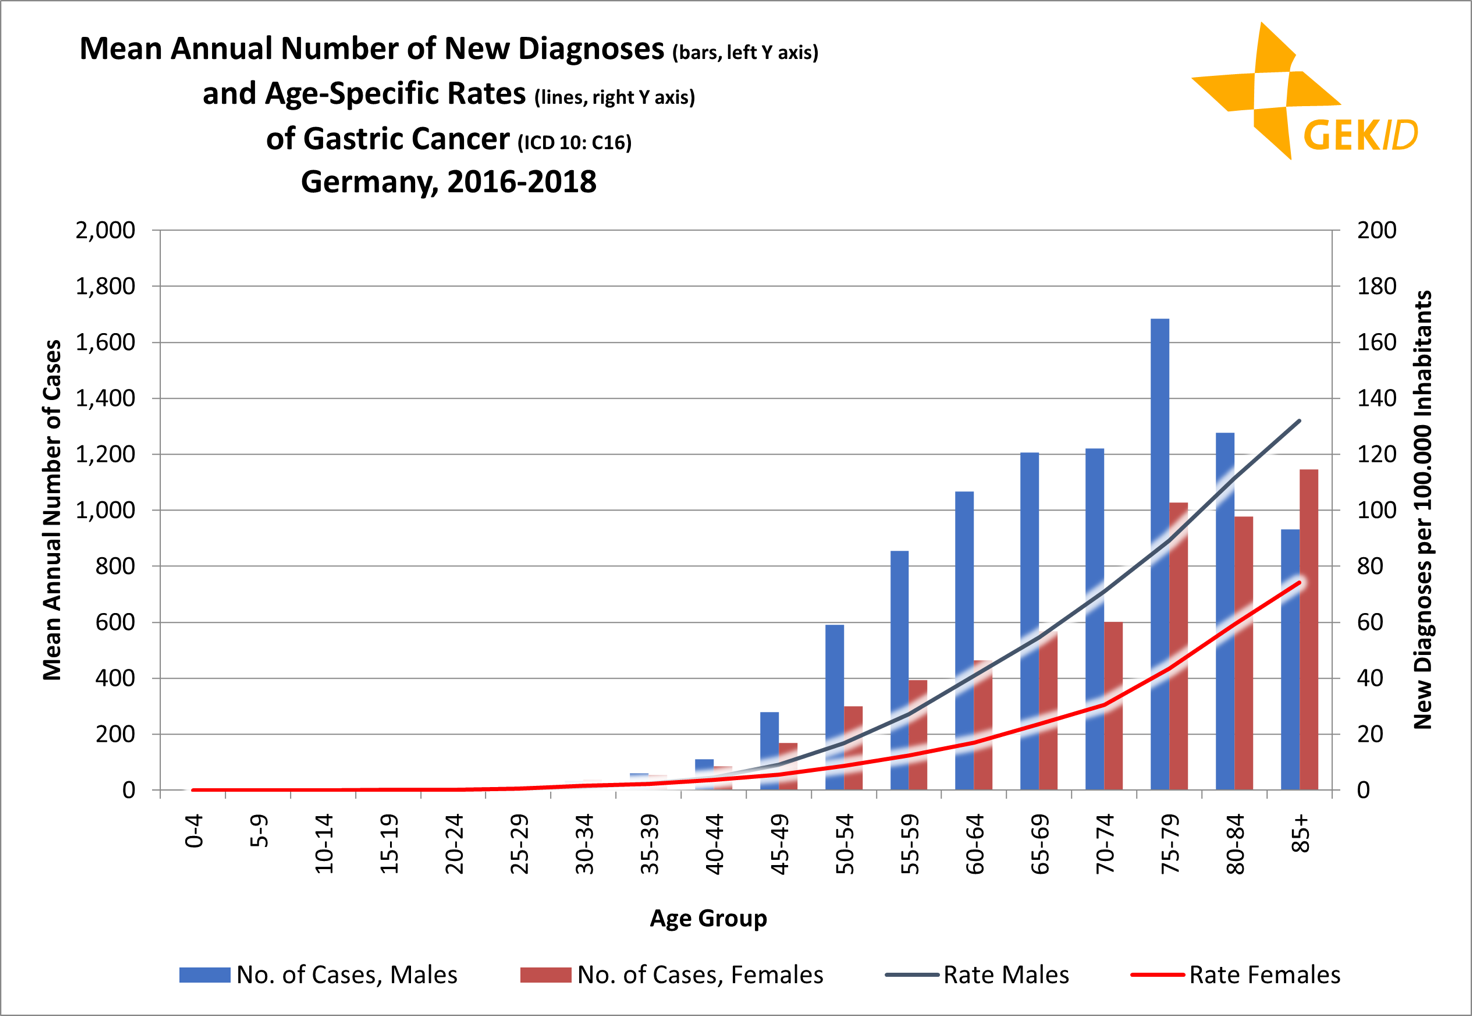 Age distribution of gastric cancer incidence (ICD 10: C16) - age-specific case numbers and rates 1.